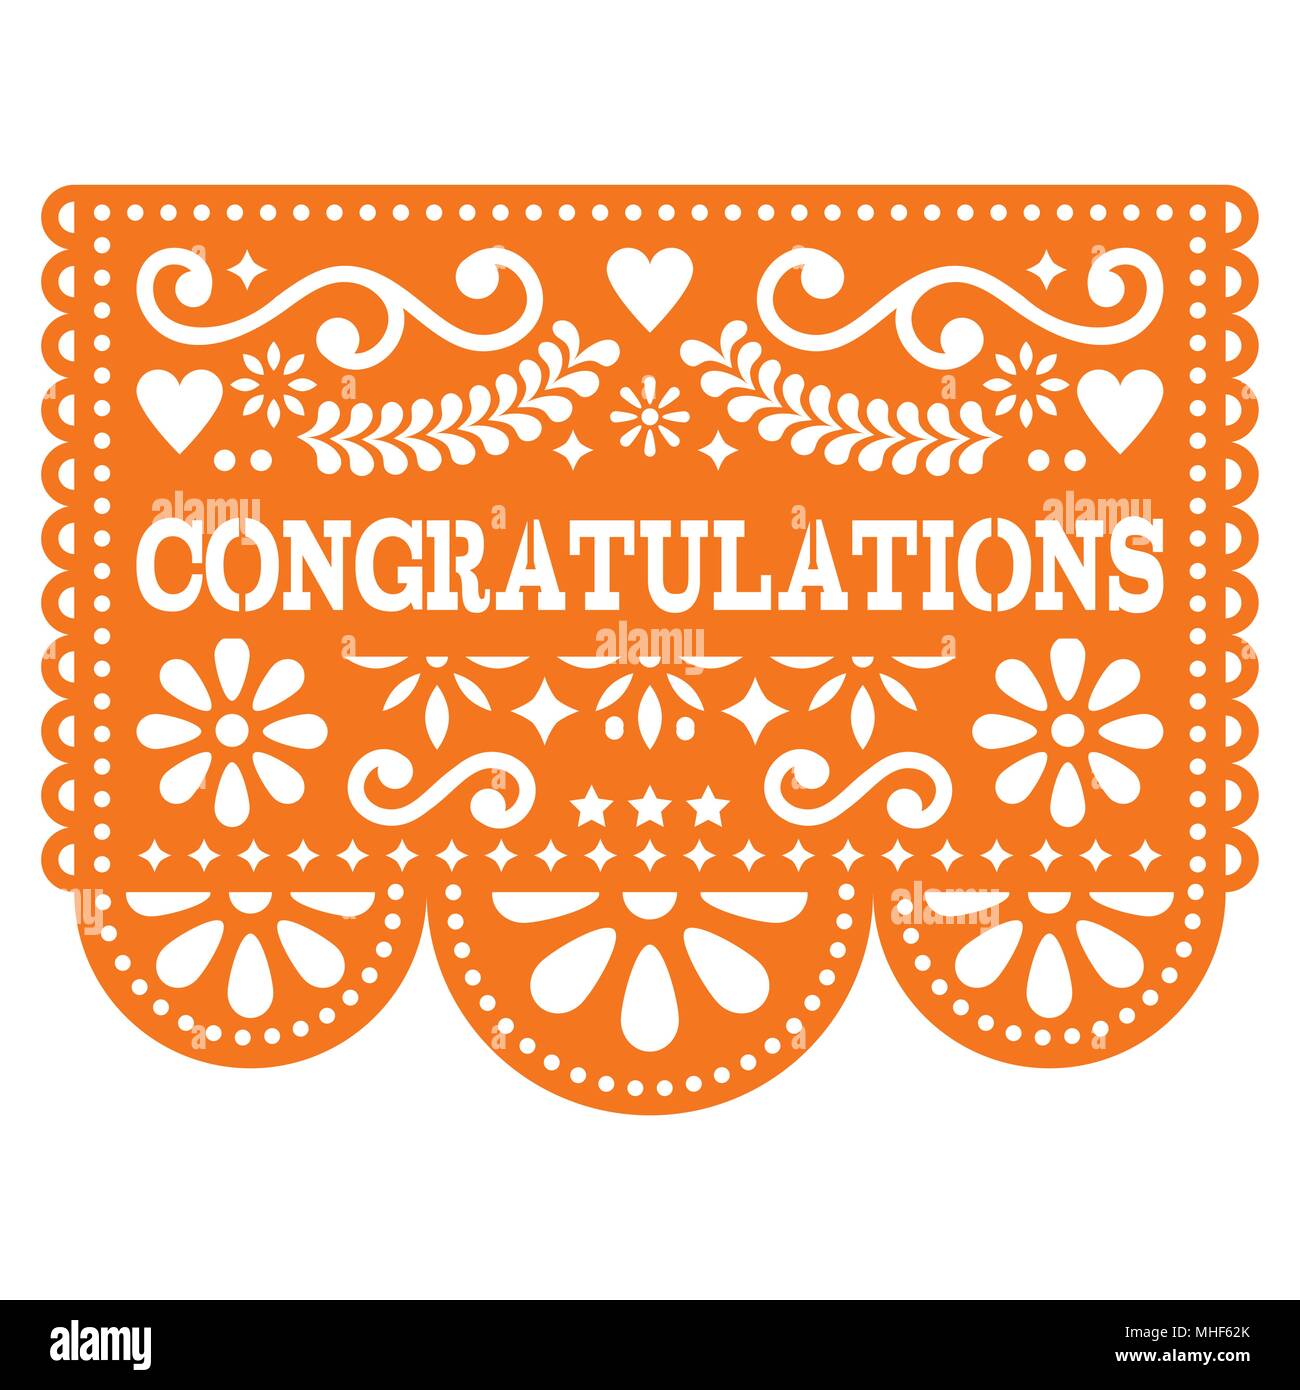 Congratulations Papel Picado vector design, greeting card, Mexican paper decoration with pattern. Stock Vector